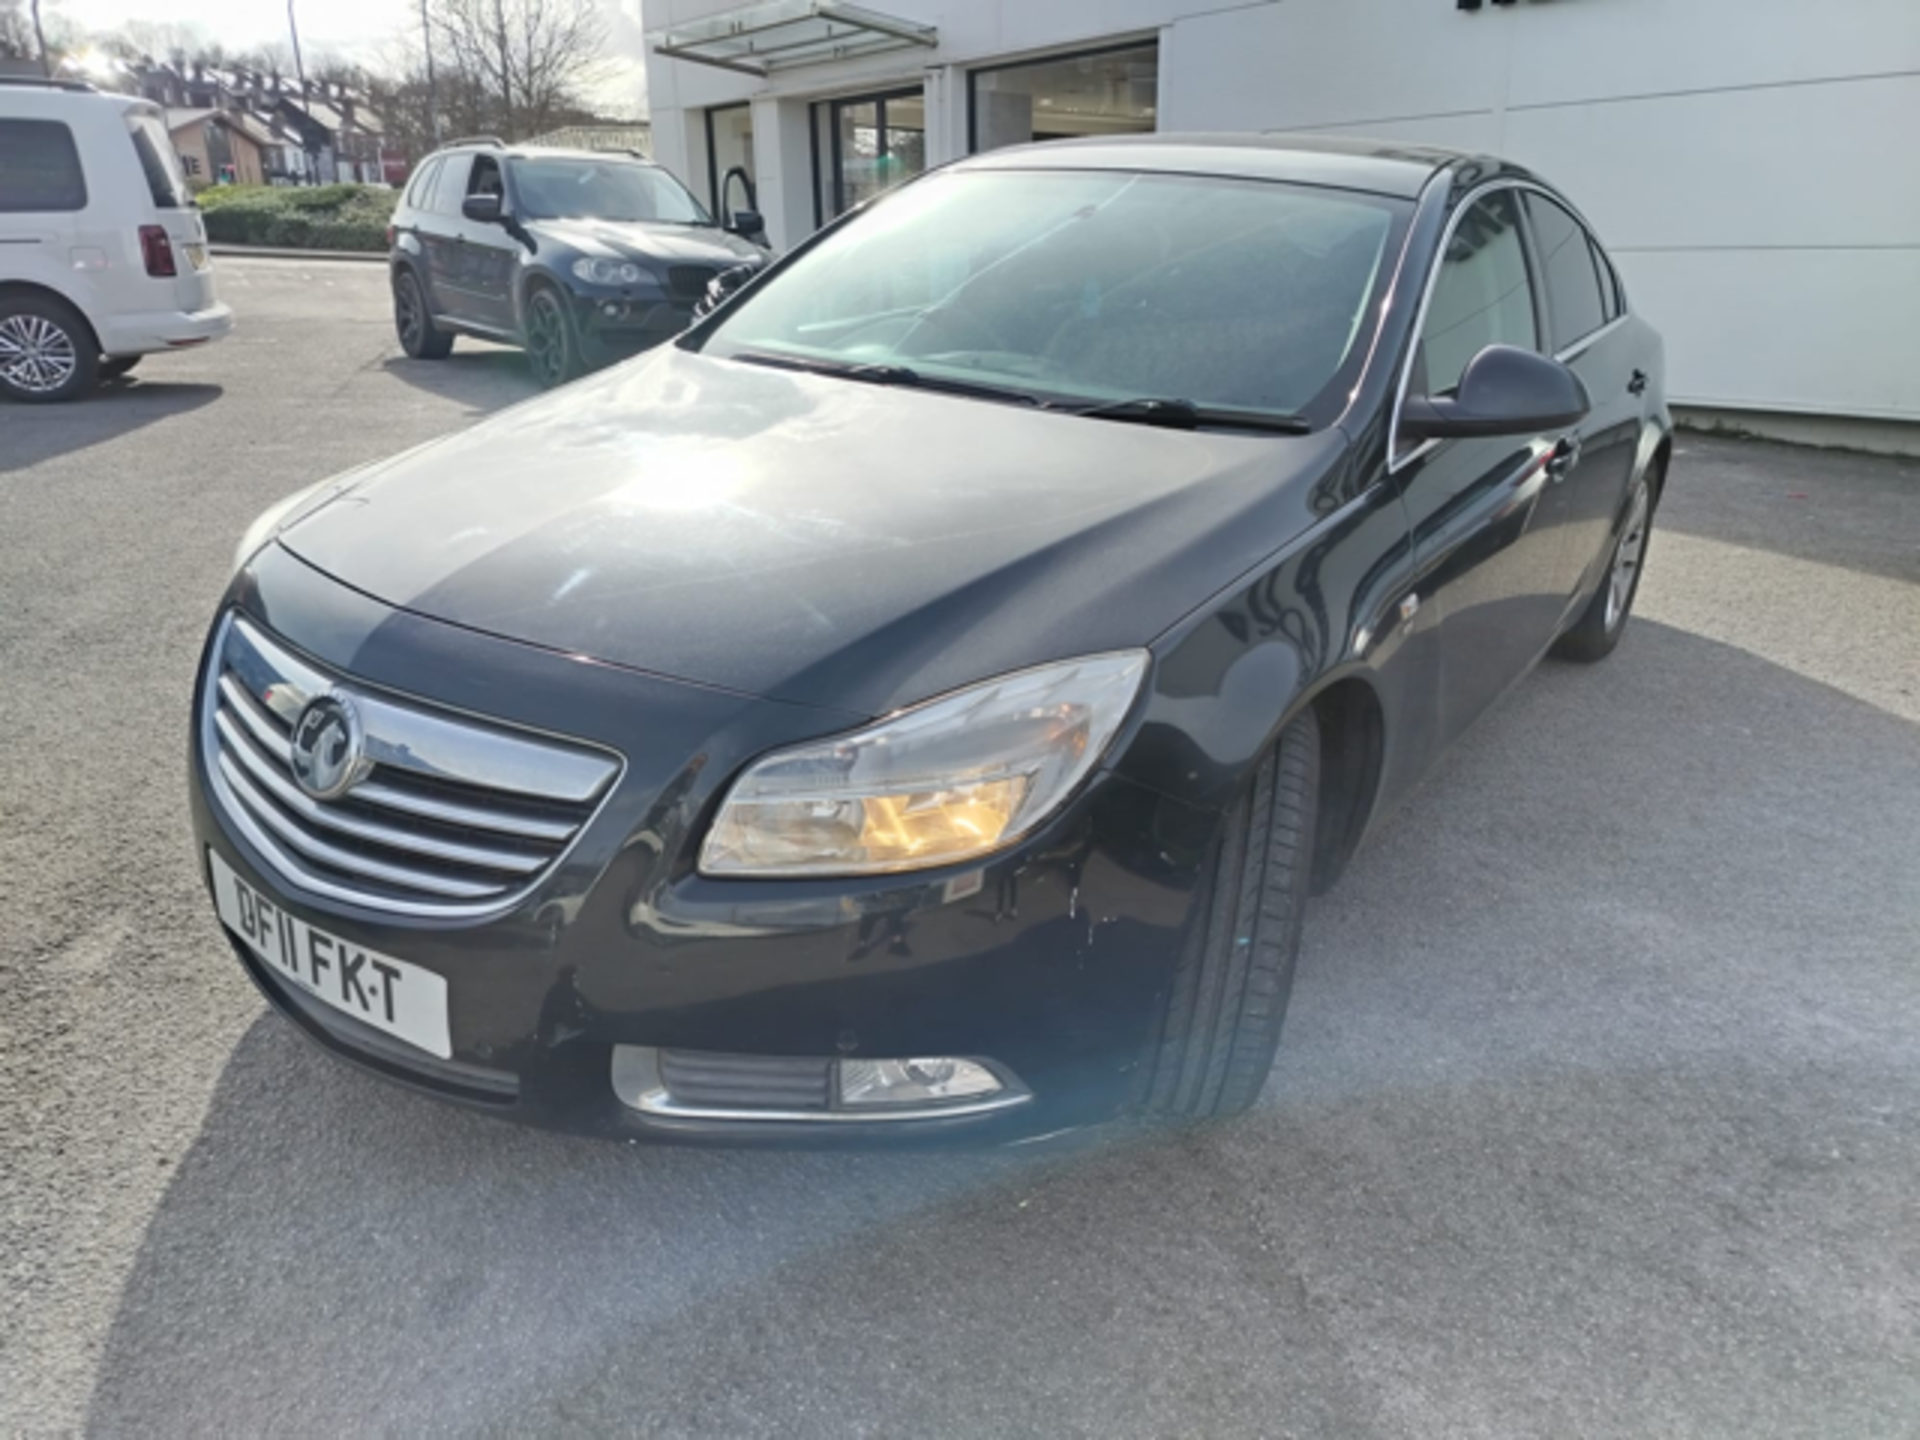 VAUXHALL INSIGNIA DF11 FKT - Image 2 of 11